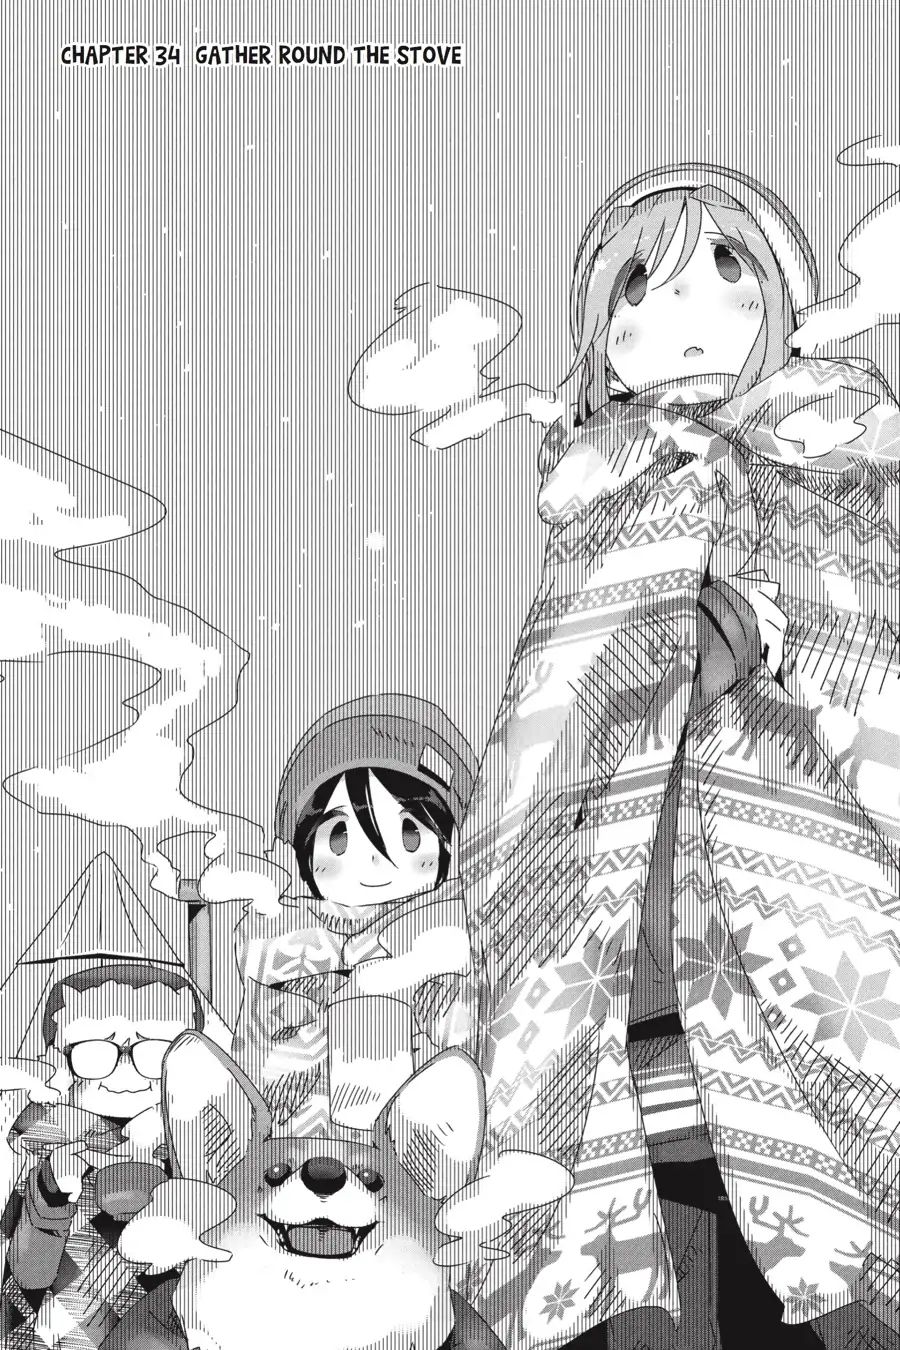 Yurucamp Chapter 34: Gather Round The Stove - Picture 3